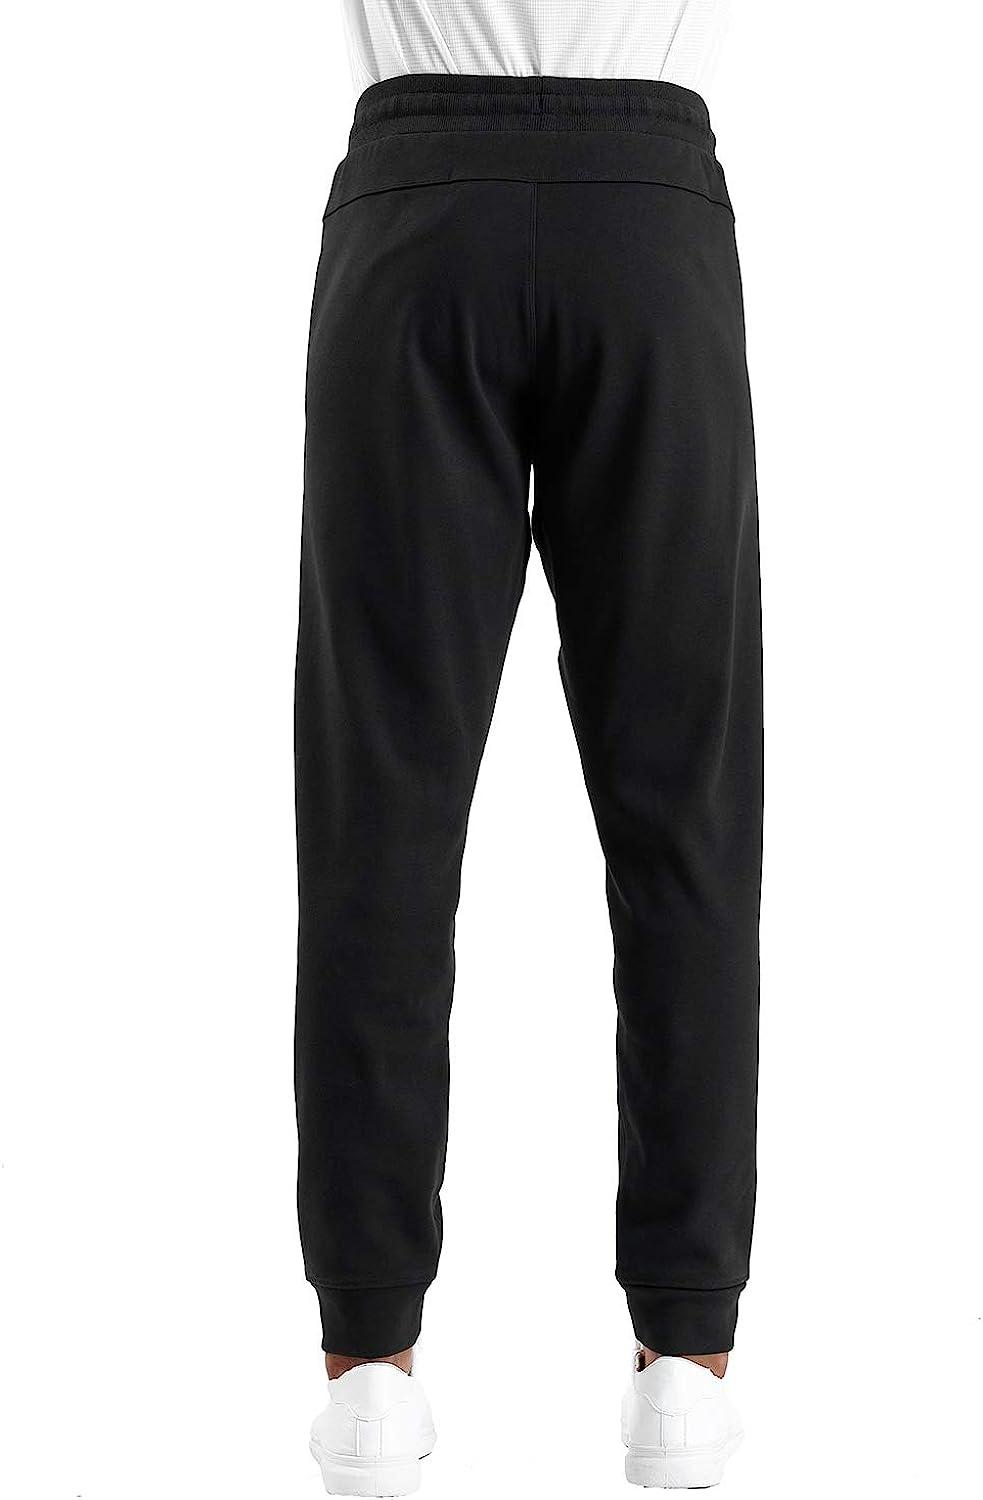 THE GYM PEOPLE Men's Fleece Joggers Pants with Deep Pockets Athletic  Loose-fit Sweatpants for Workout, Running, Training Fleece Lined Black Large